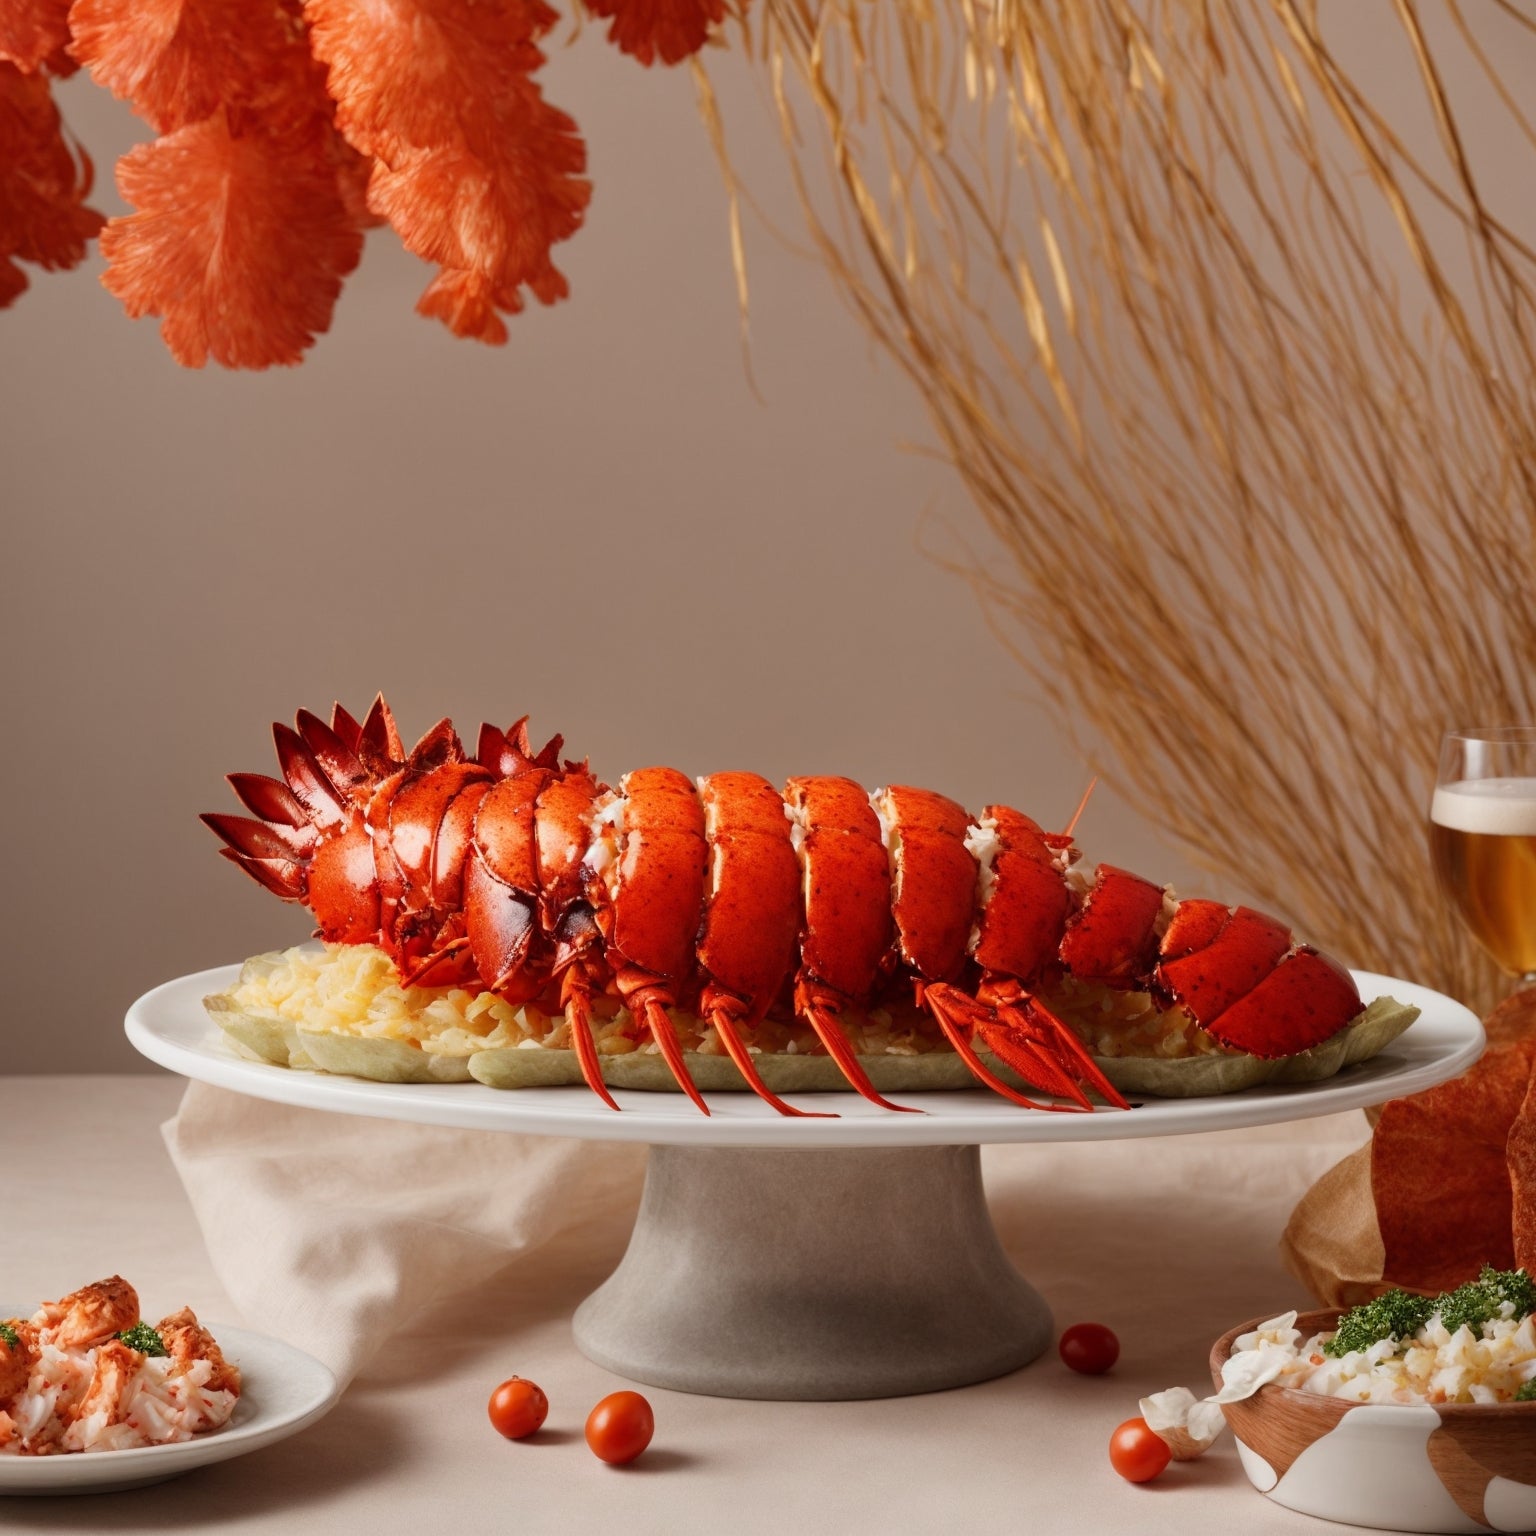 Feast Fit for Royalty: Globalseafoods.com's Lobster Tail Extravaganza